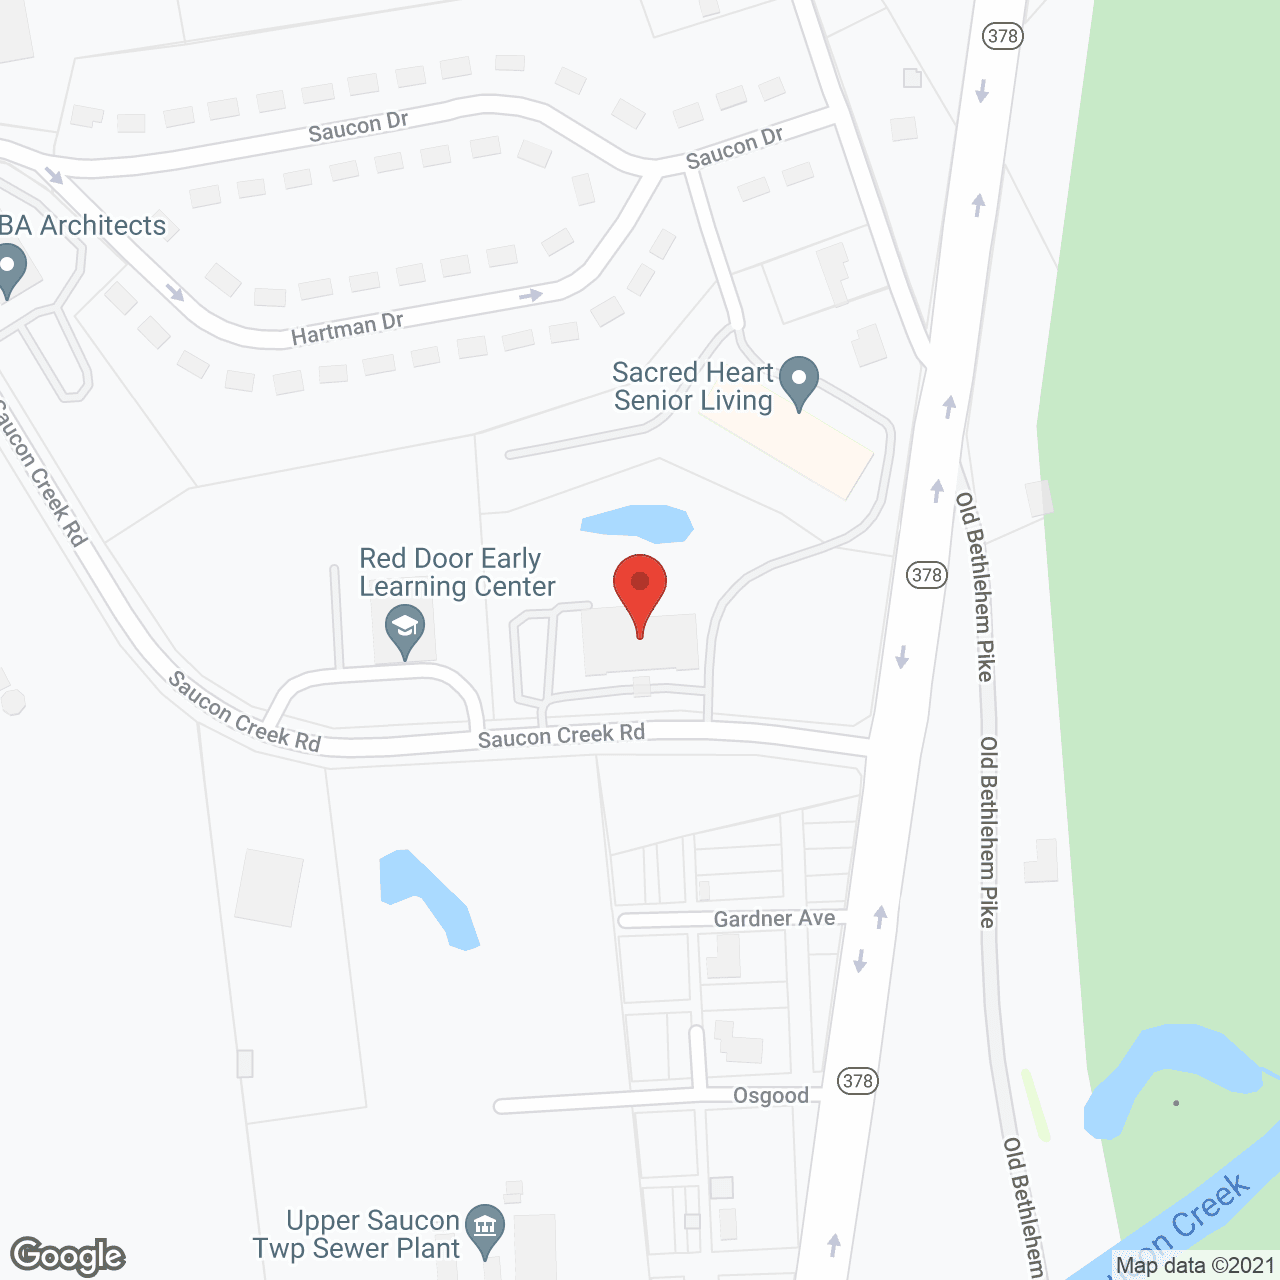 Sacred Heart Senior Living by Saucon Creek II in google map